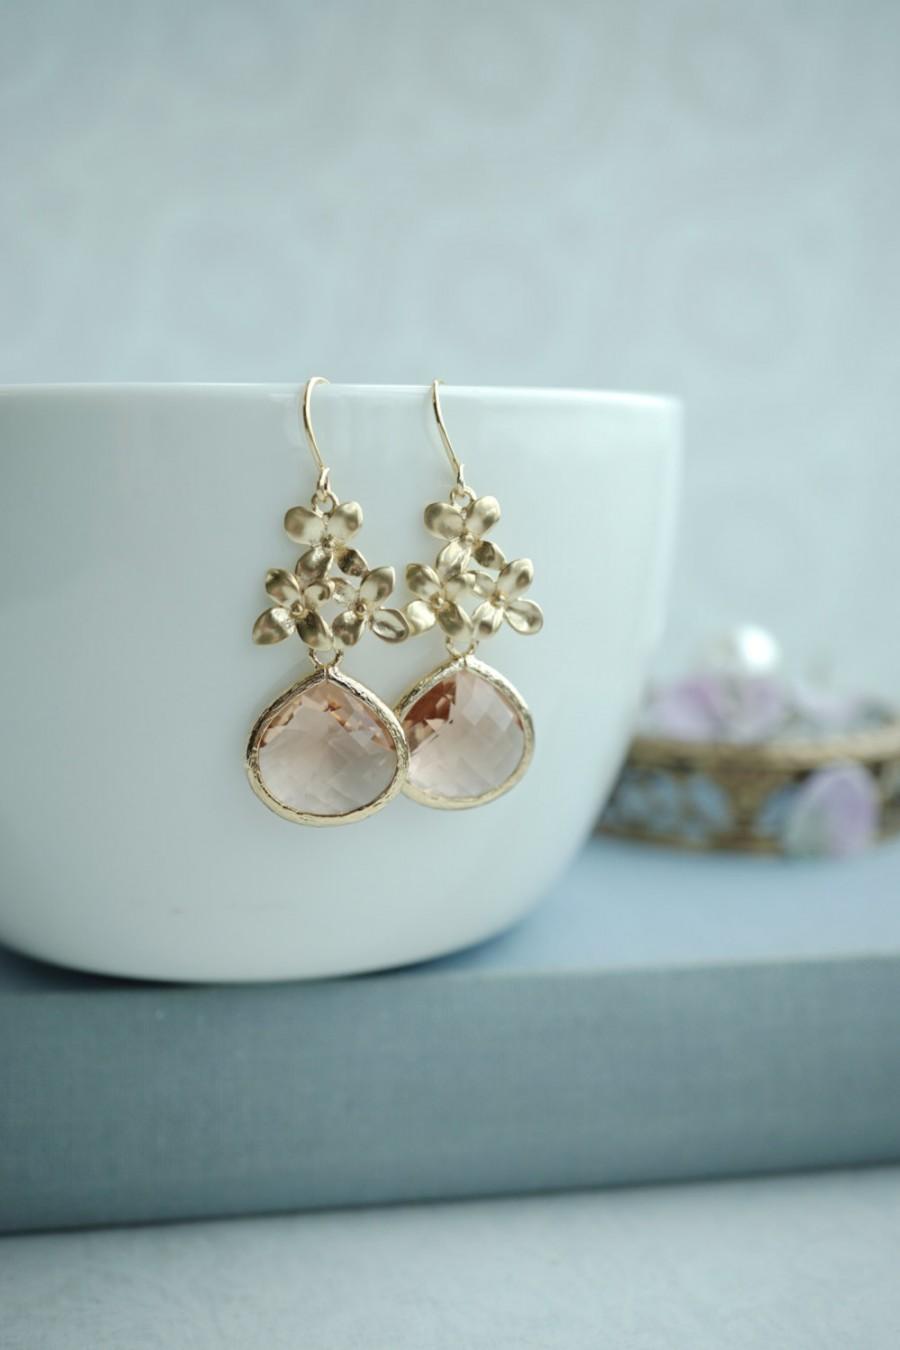 Wedding - Champagne Peach Earrings, Gold Champagne Flower Earrings, Bridesmaids Gift, Mothers Day, Cherry Blossom Dangle Earrings, Wife Valentine Gift